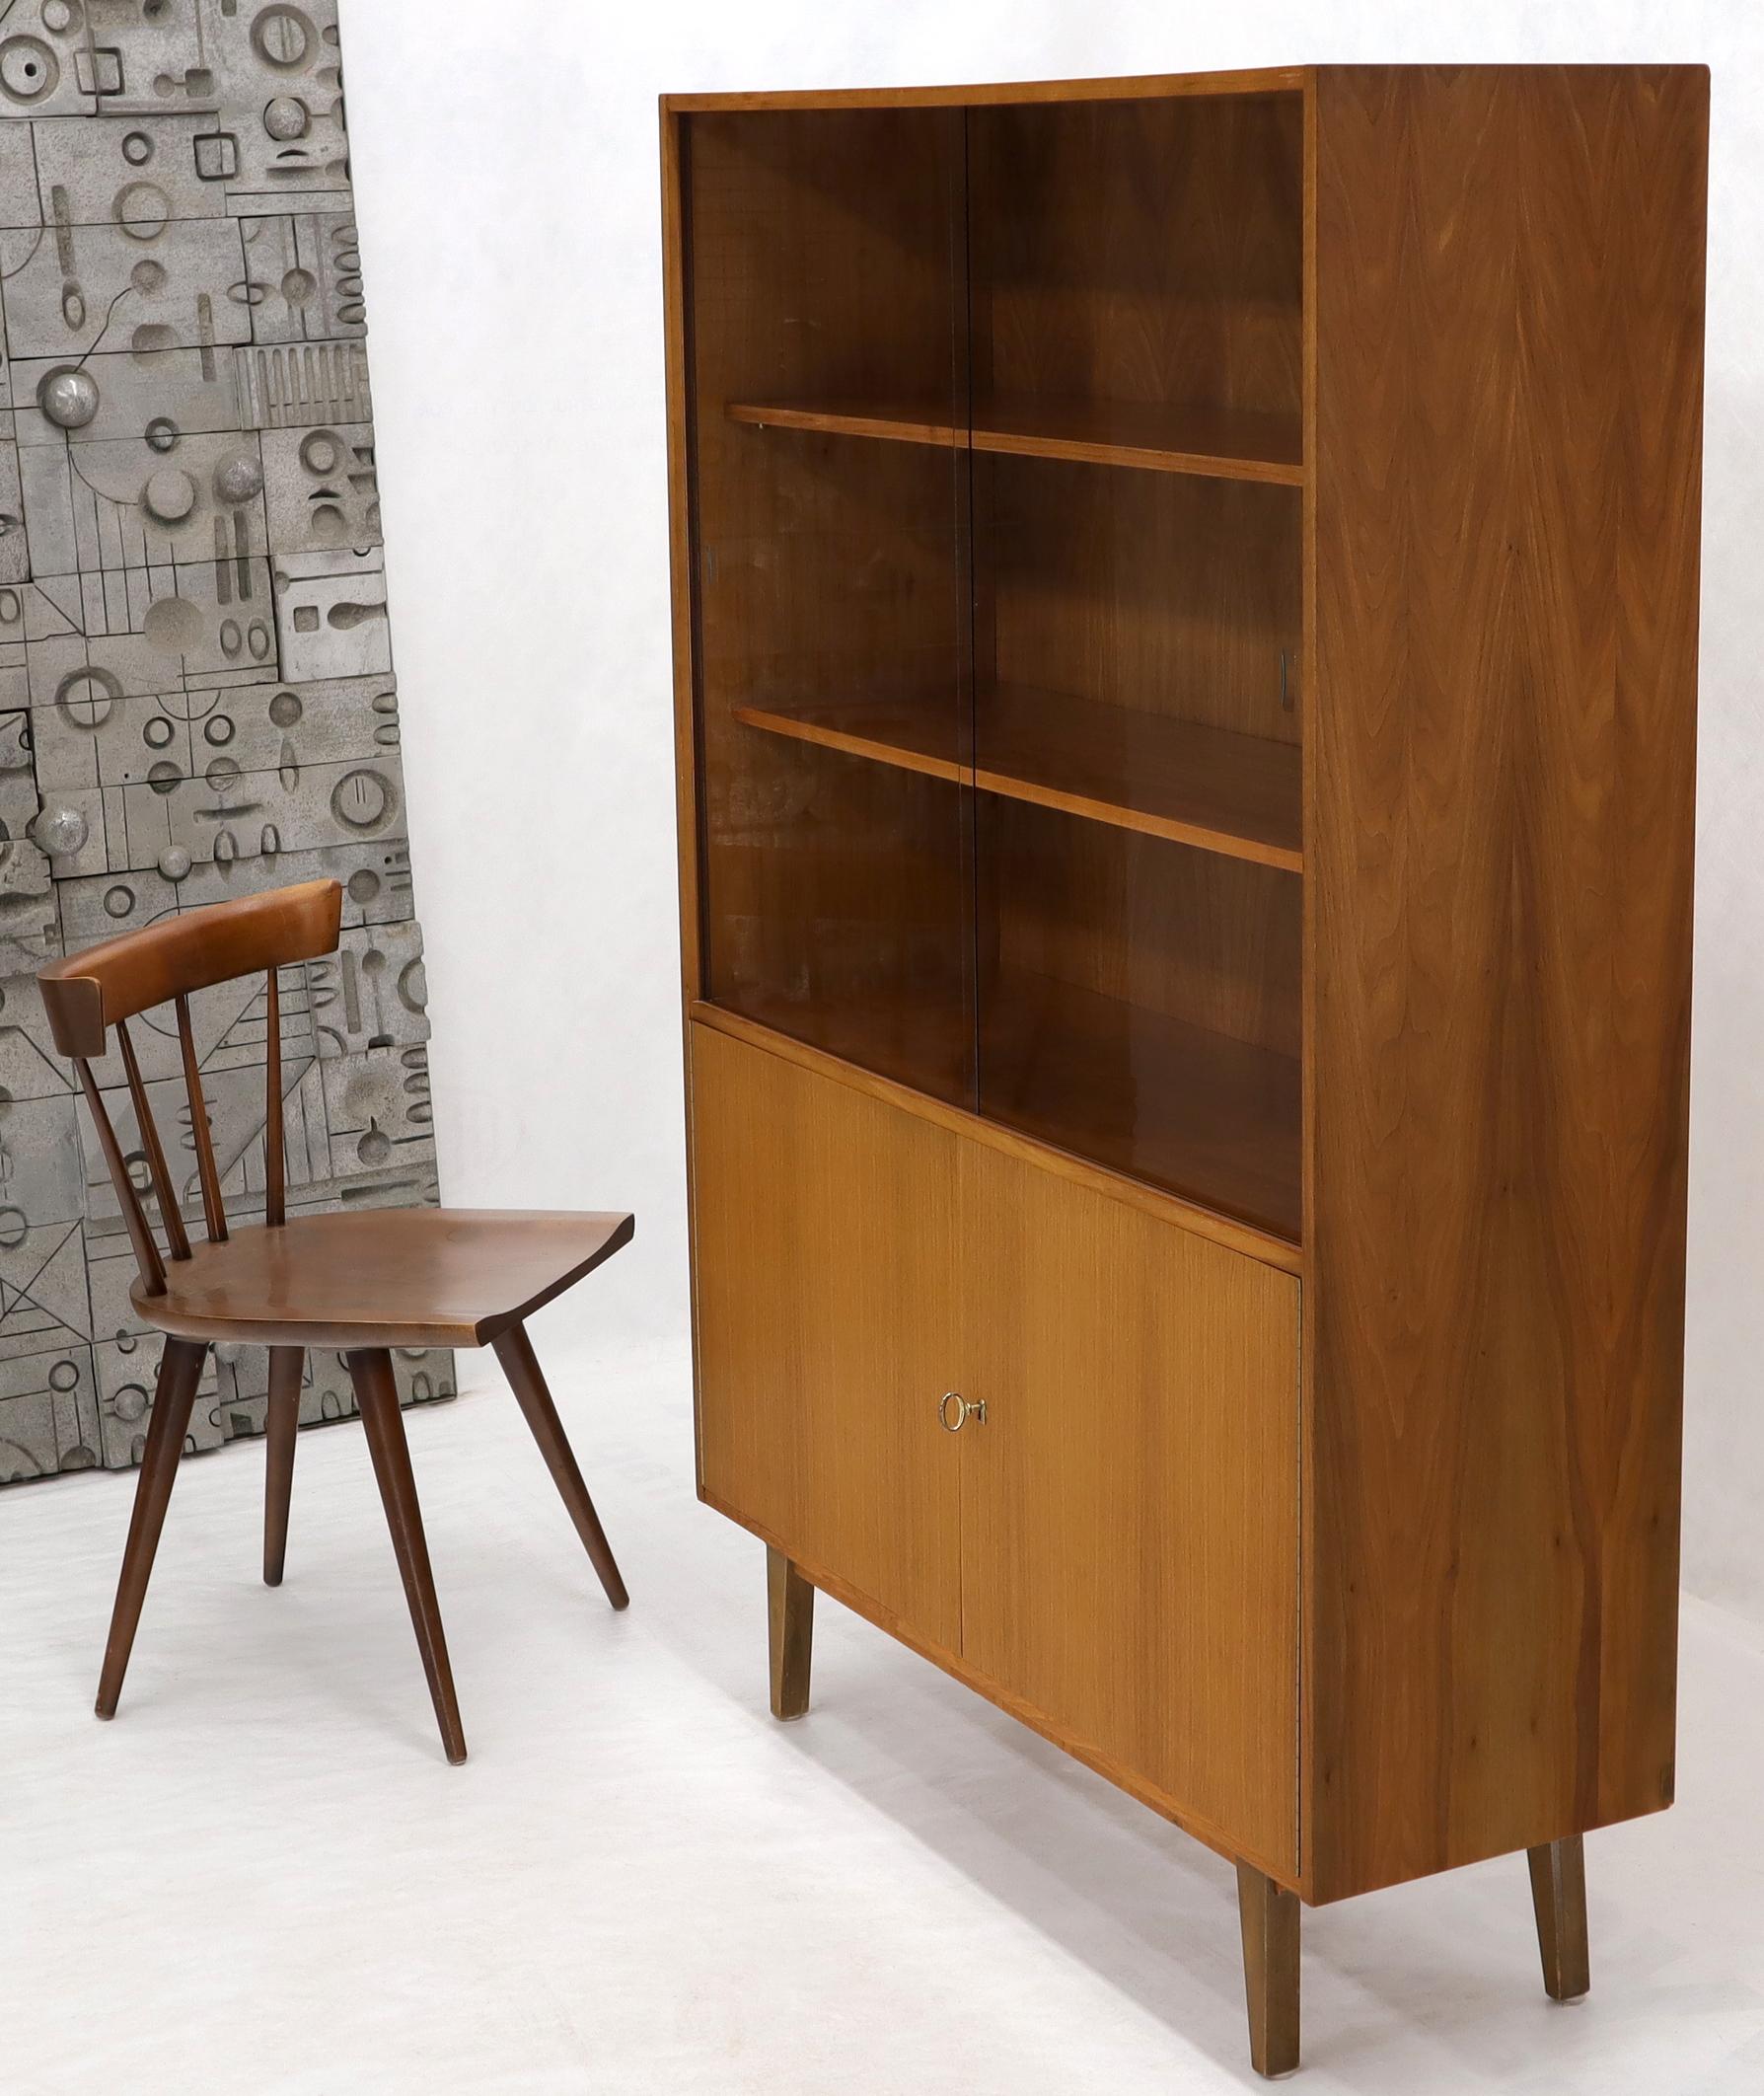 Midcentury Danish modern three shelves bookcase hutch credenza cabinet with two sliding glass doors and cabinet doors on the bottom. The bottom compartment lock works and come with the key.